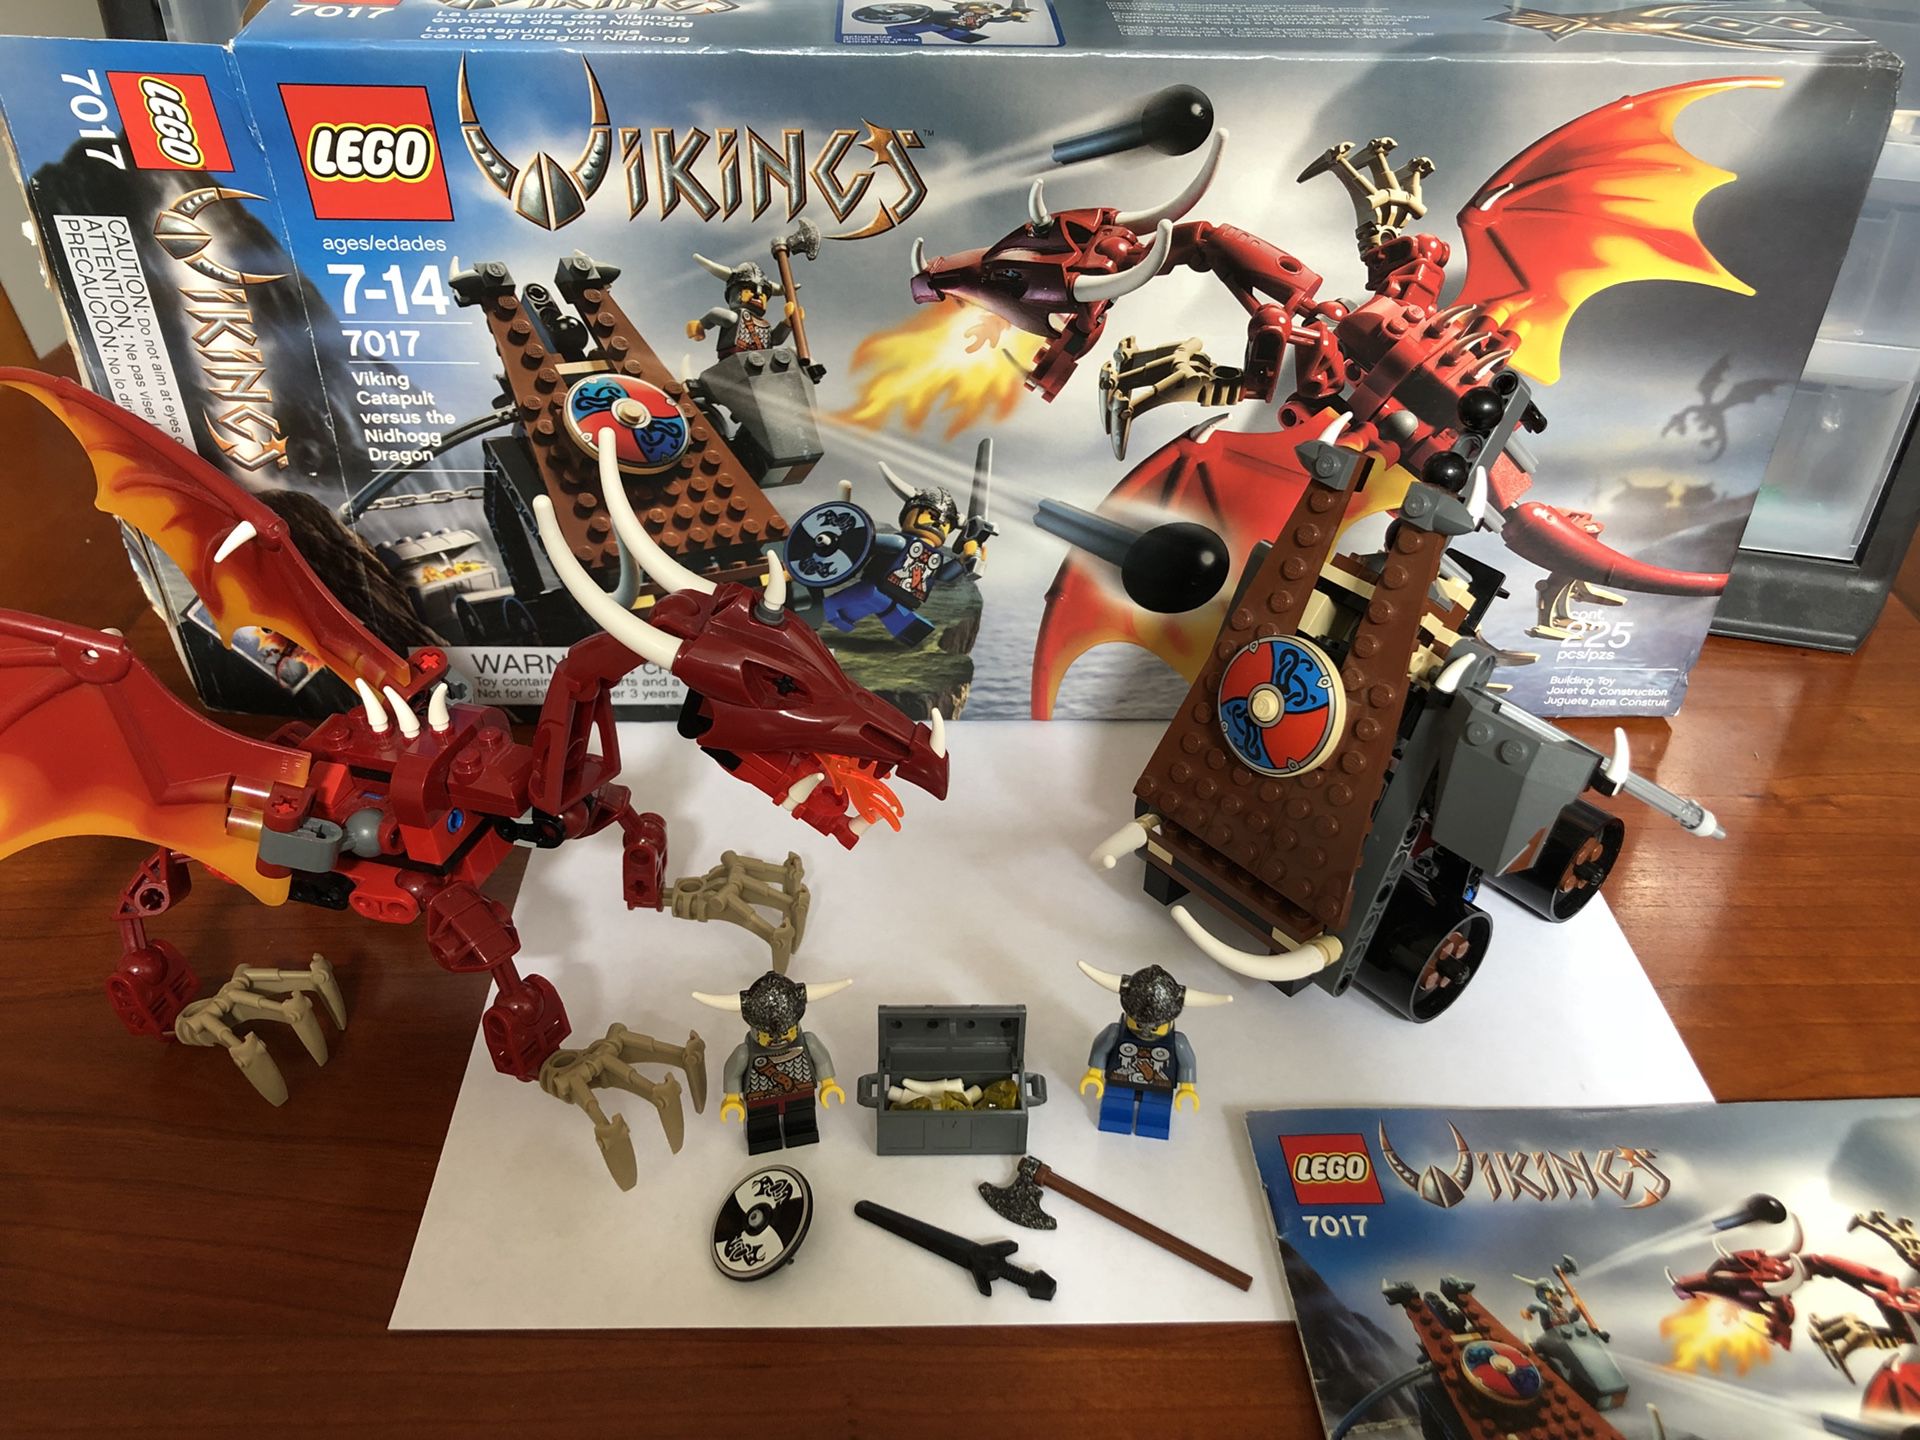 LEGO 7017 | Viking Catapult | complete Sale Morrisville, NC - OfferUp